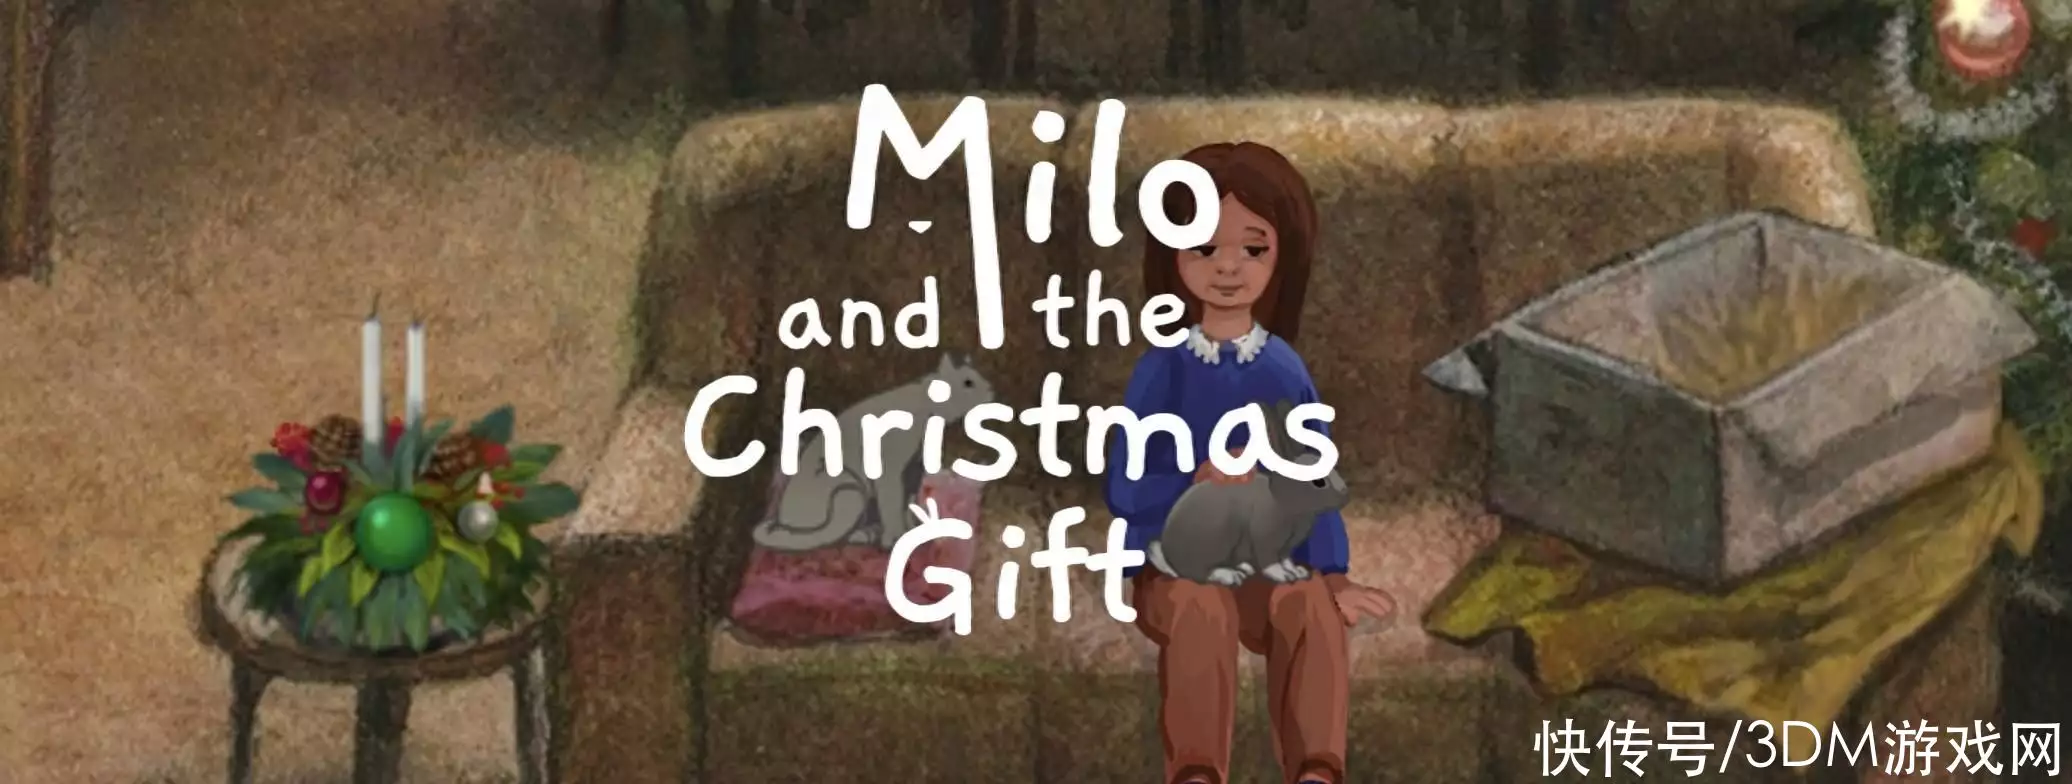 Hand -painted wind cat solution puzzle game ＂Mallo and Christmas Gifts＂ should publish a broadcast article for free